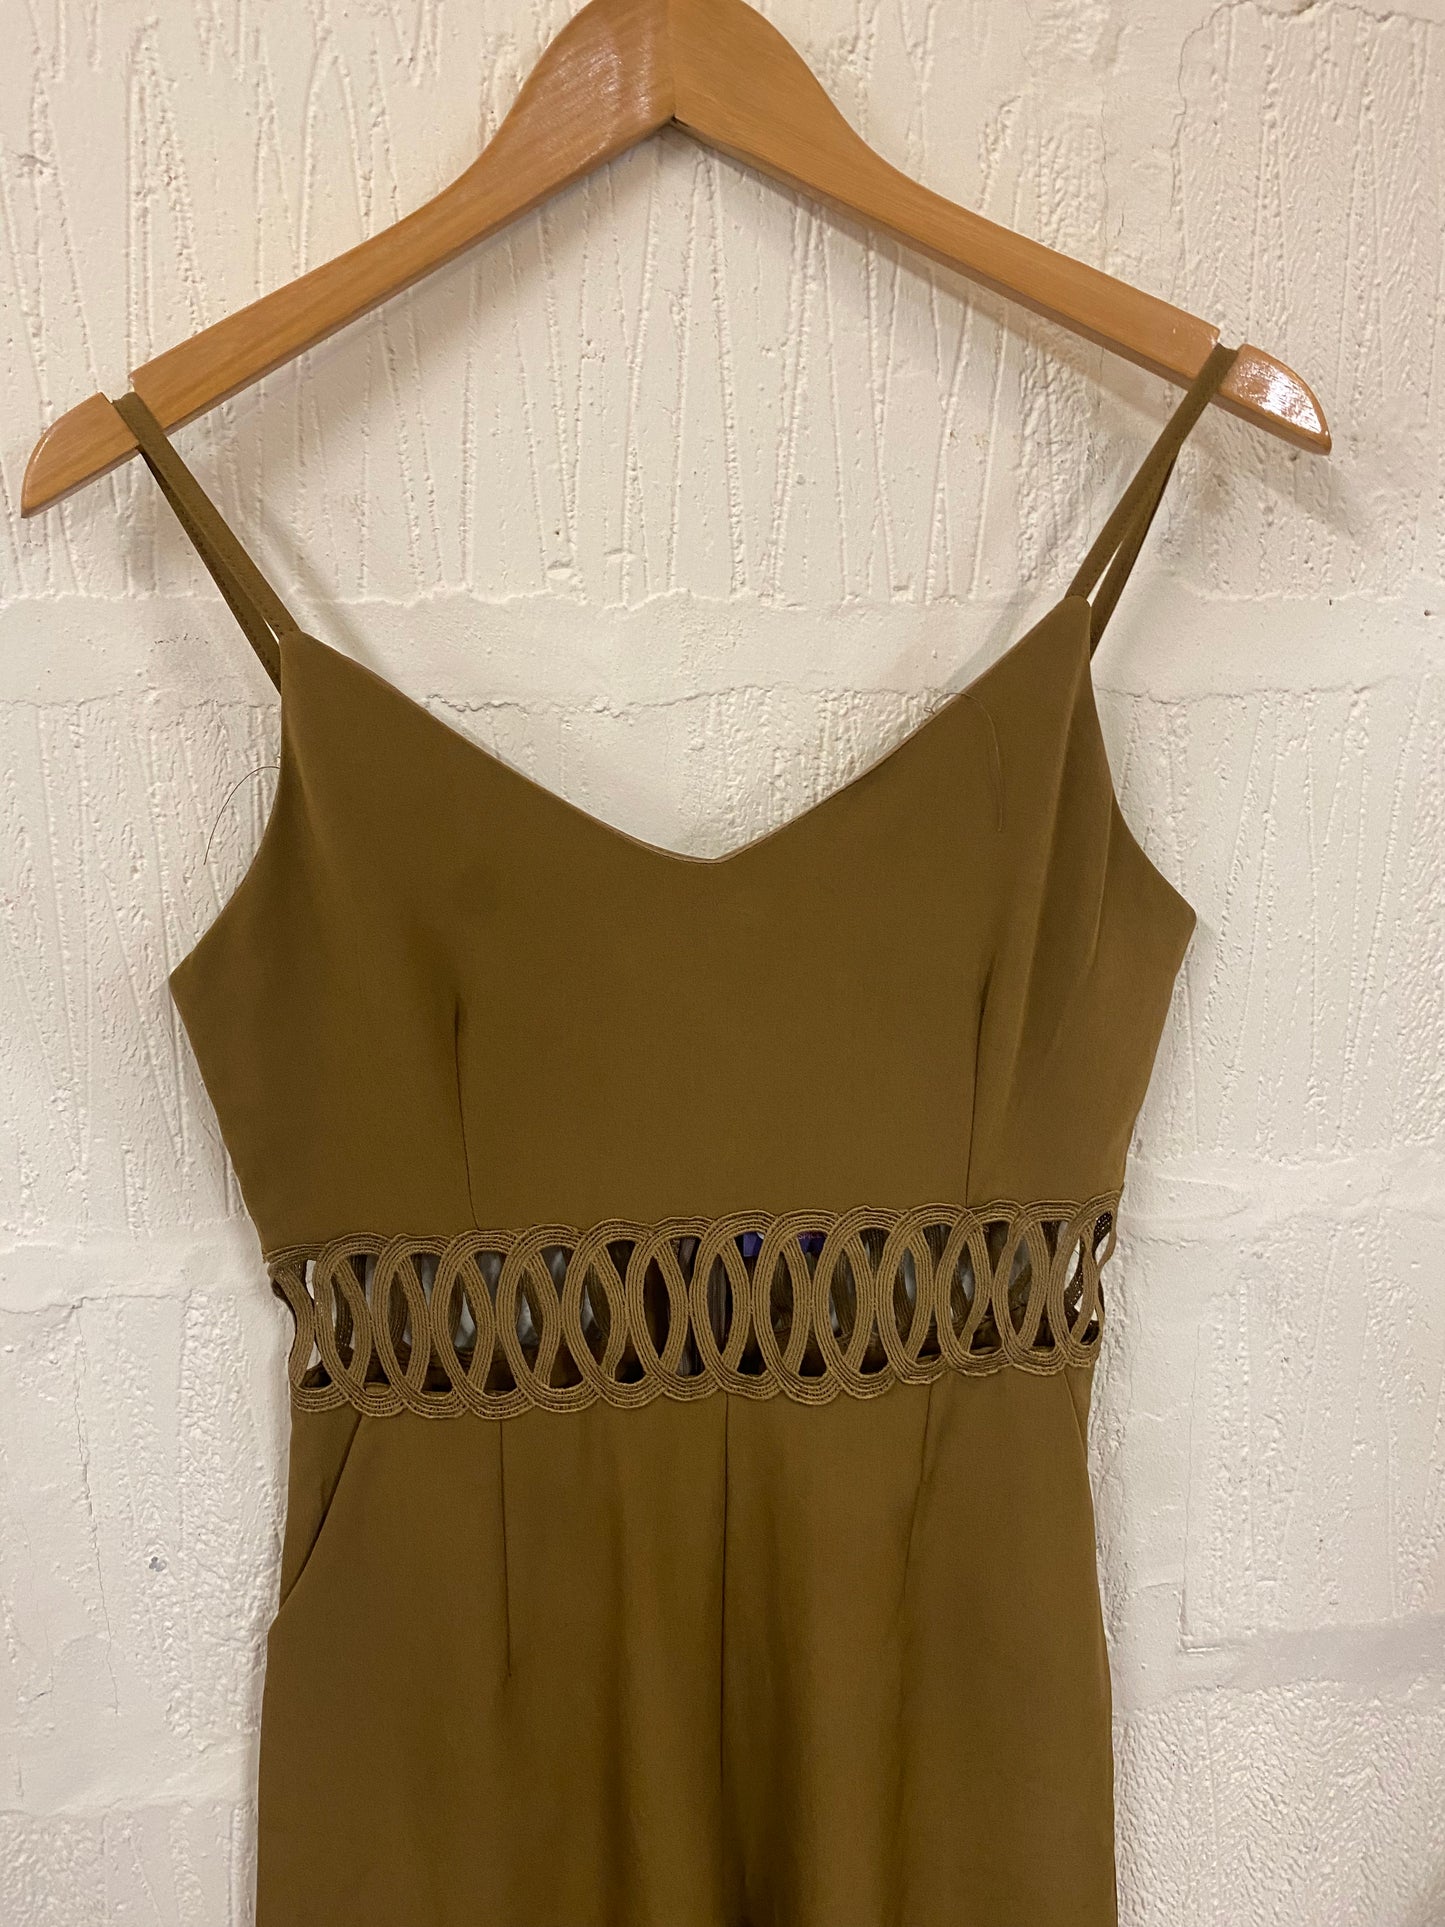 1990s Style Brown Jumpsuit Size 12